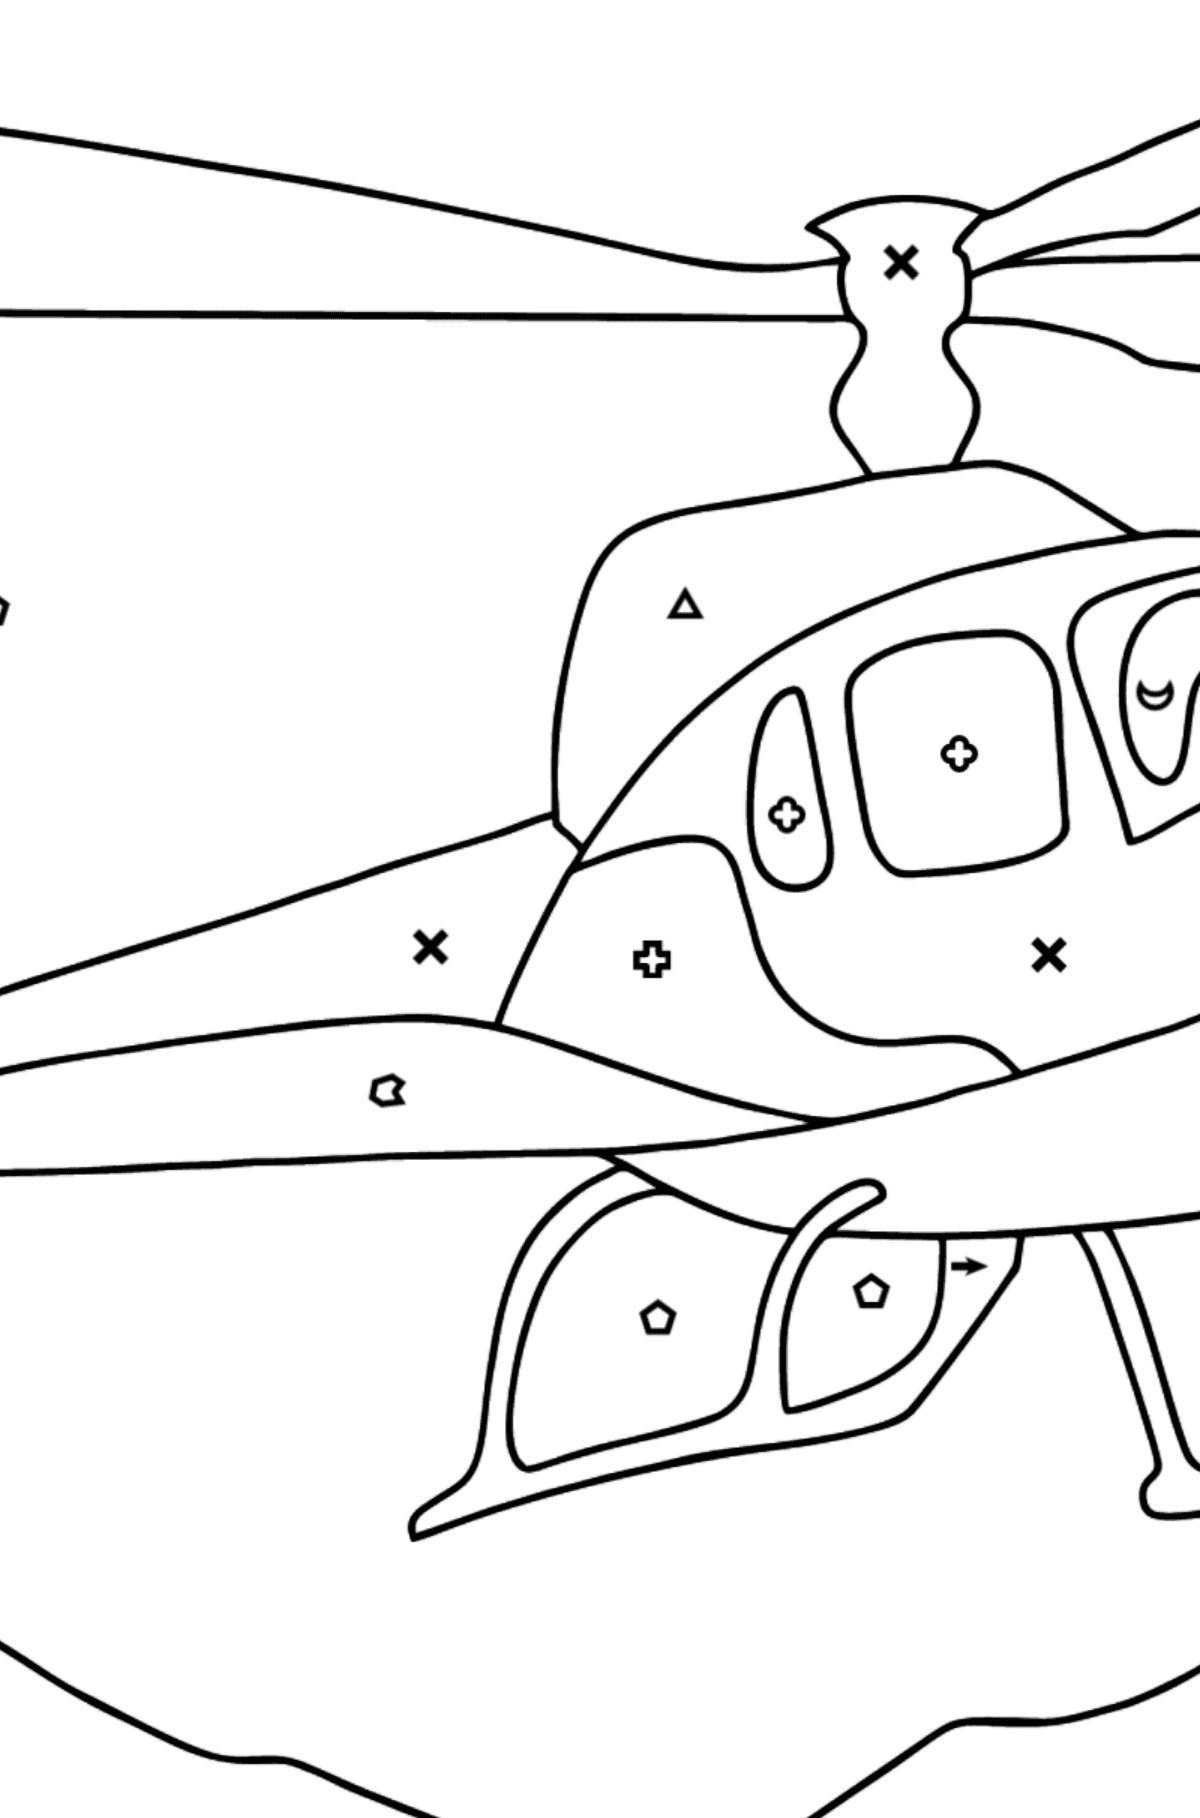 Coloring Page - A City Helicopter - Coloring by Symbols and Geometric Shapes for Kids